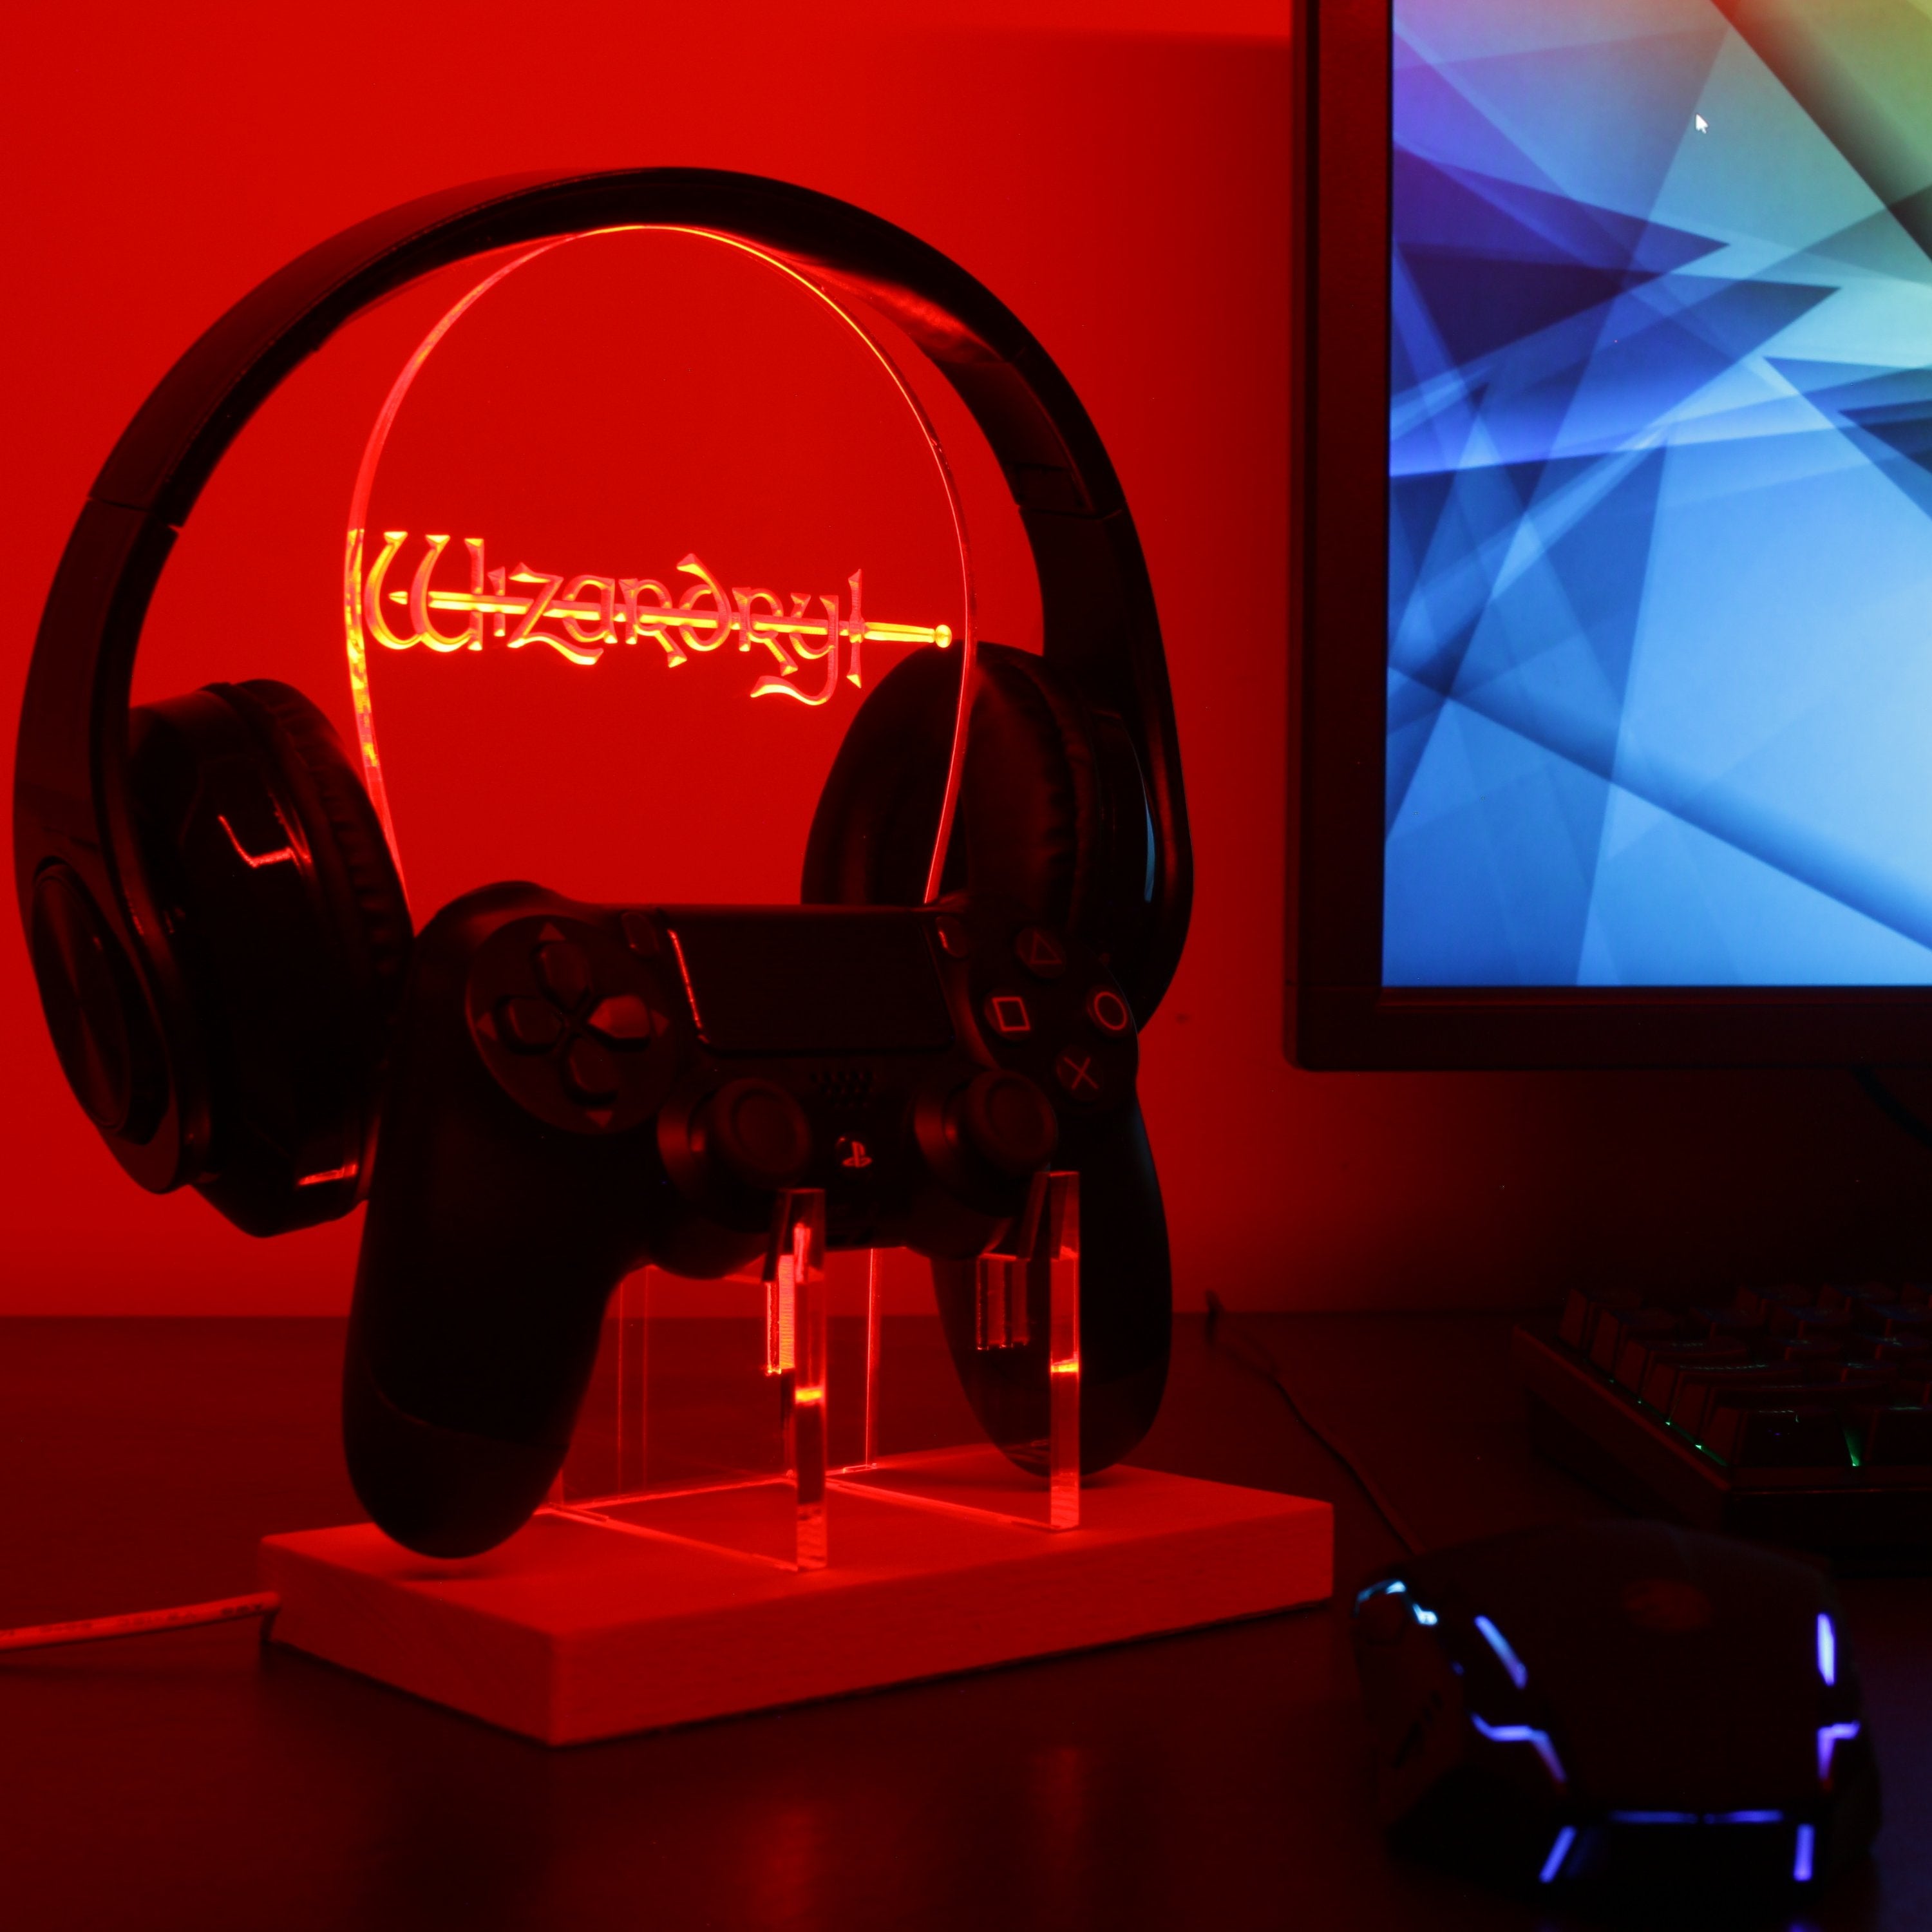 Wizardry LED Gaming Headset Controller Stand